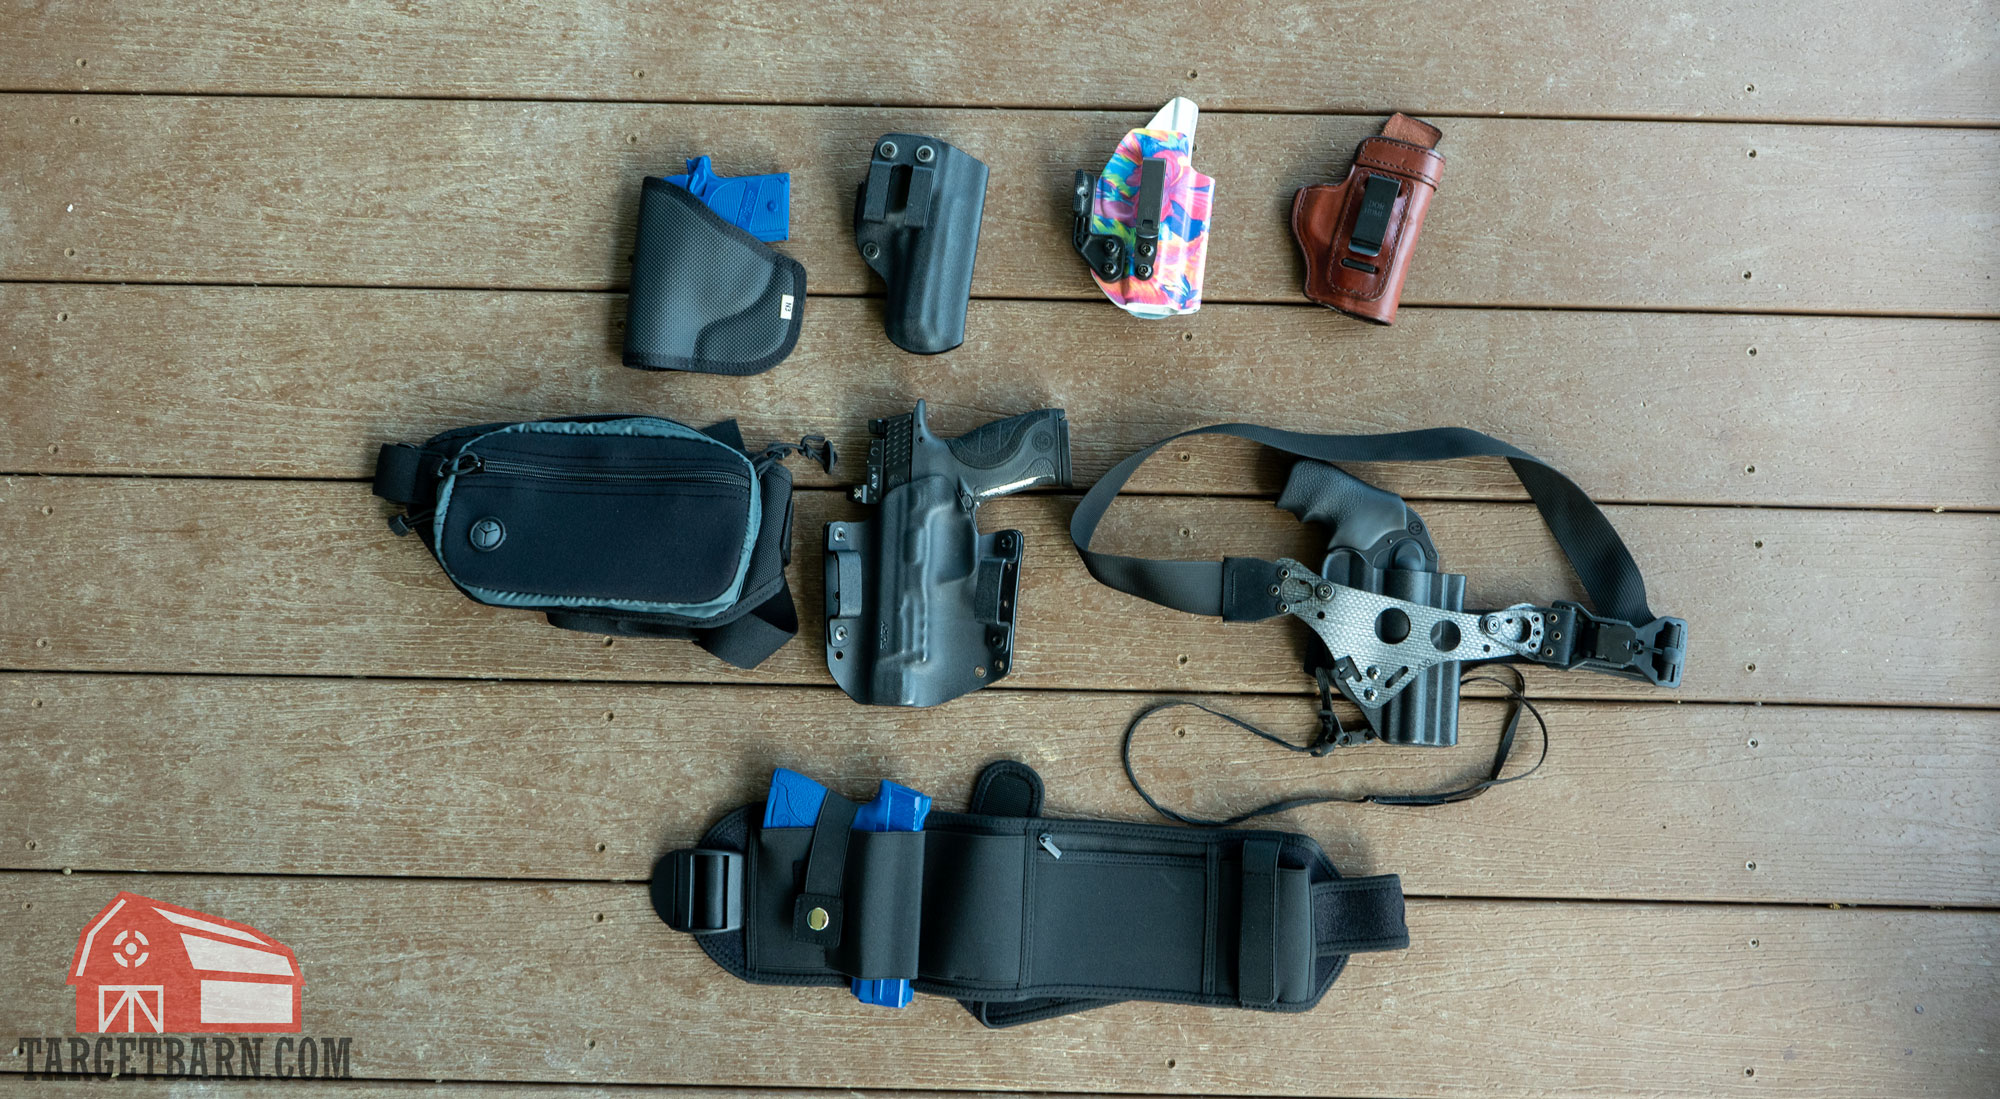 several different types of holsters, including a phlster enigma, belly band, and fanny pack showing the different ways to conceal carry